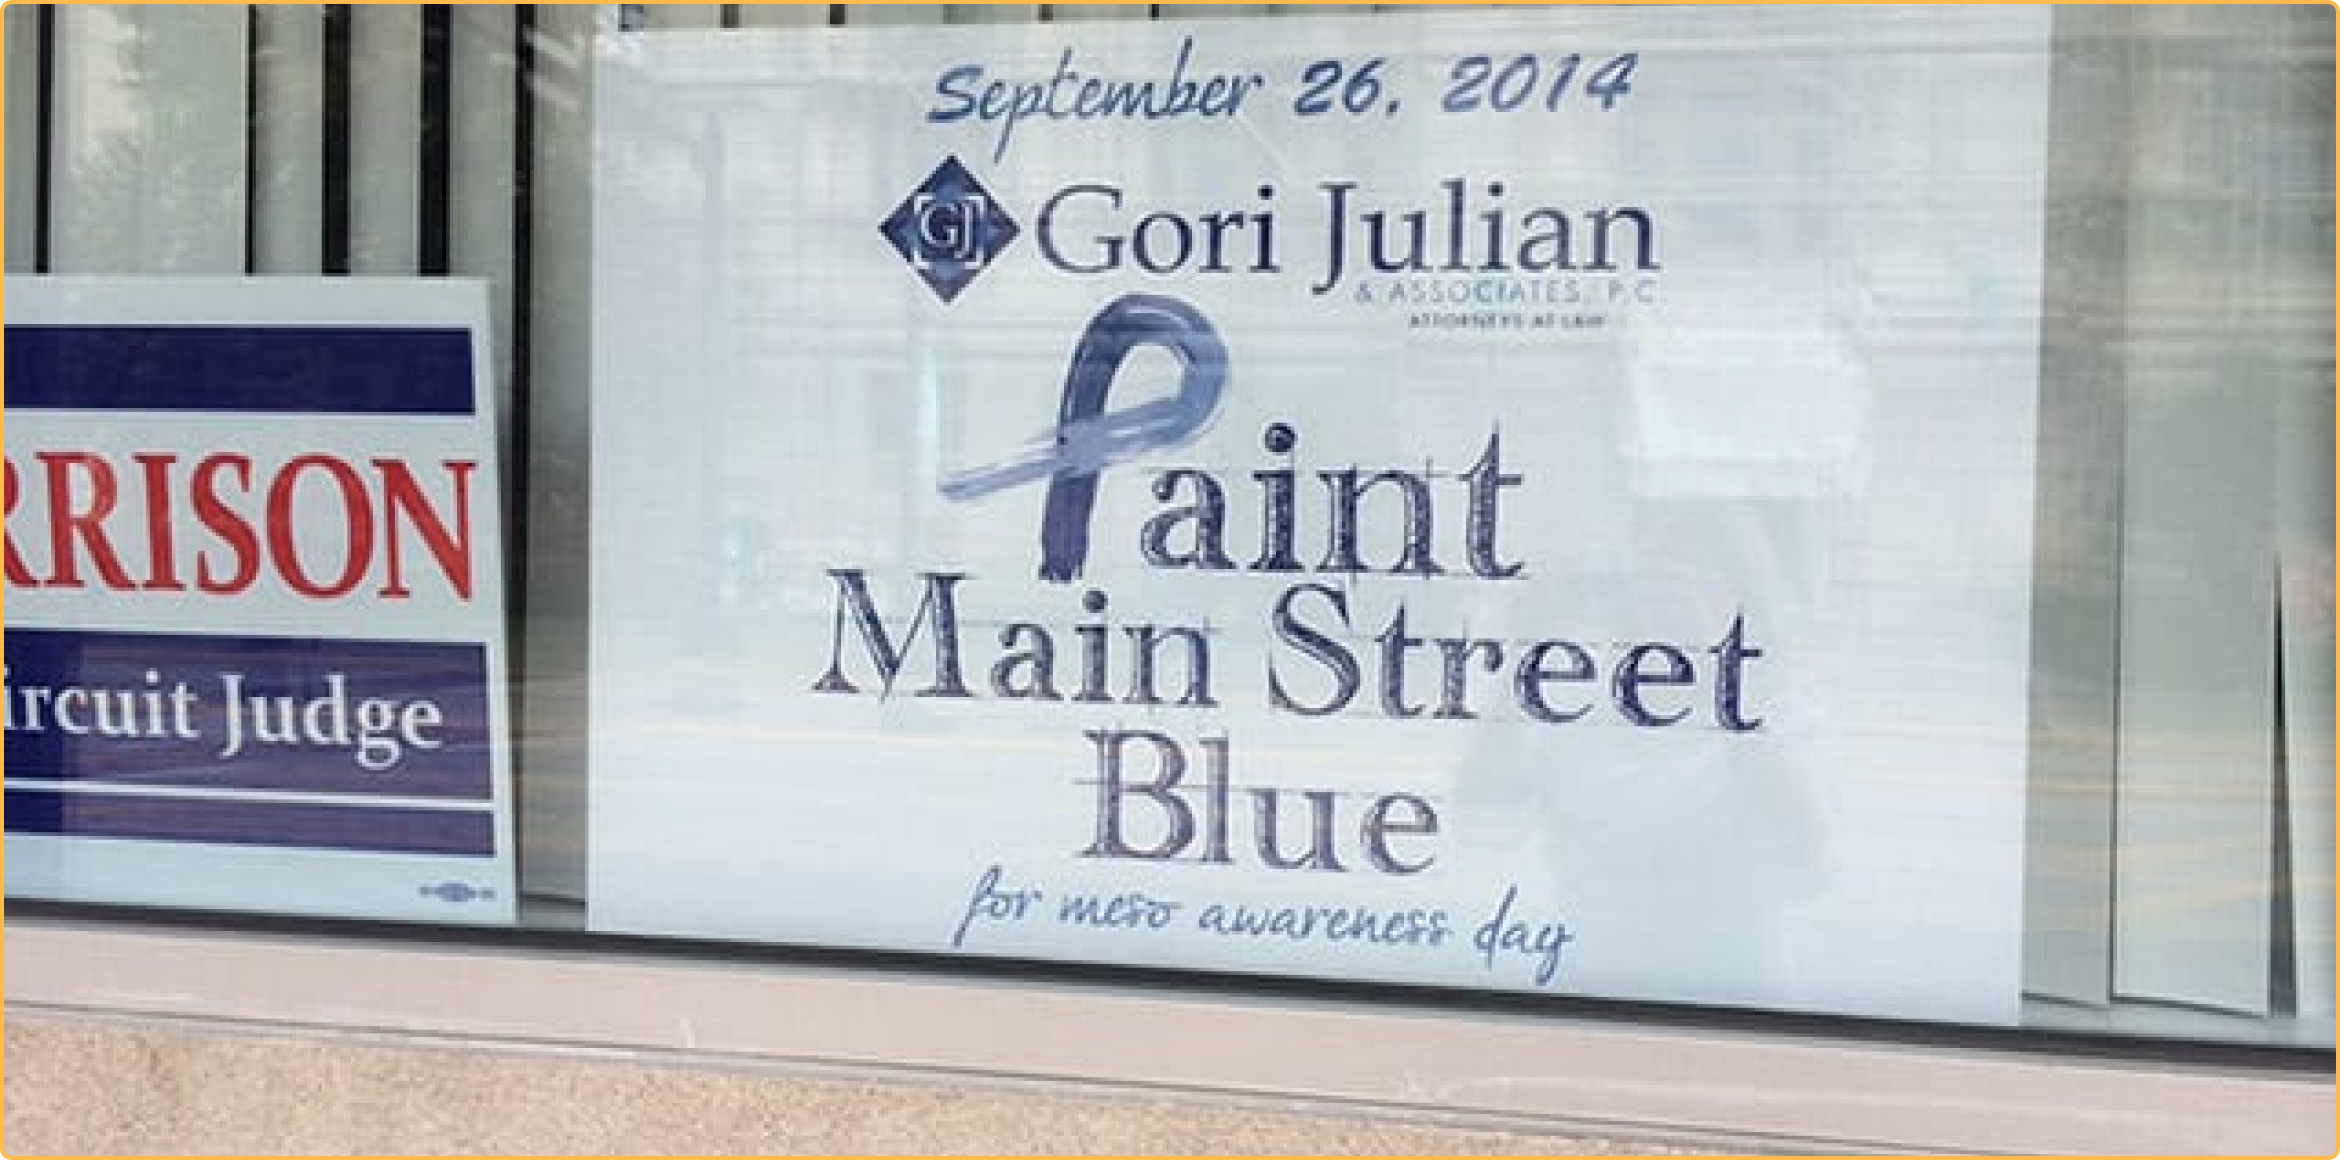 The Gori Law firm paint the main street blue event